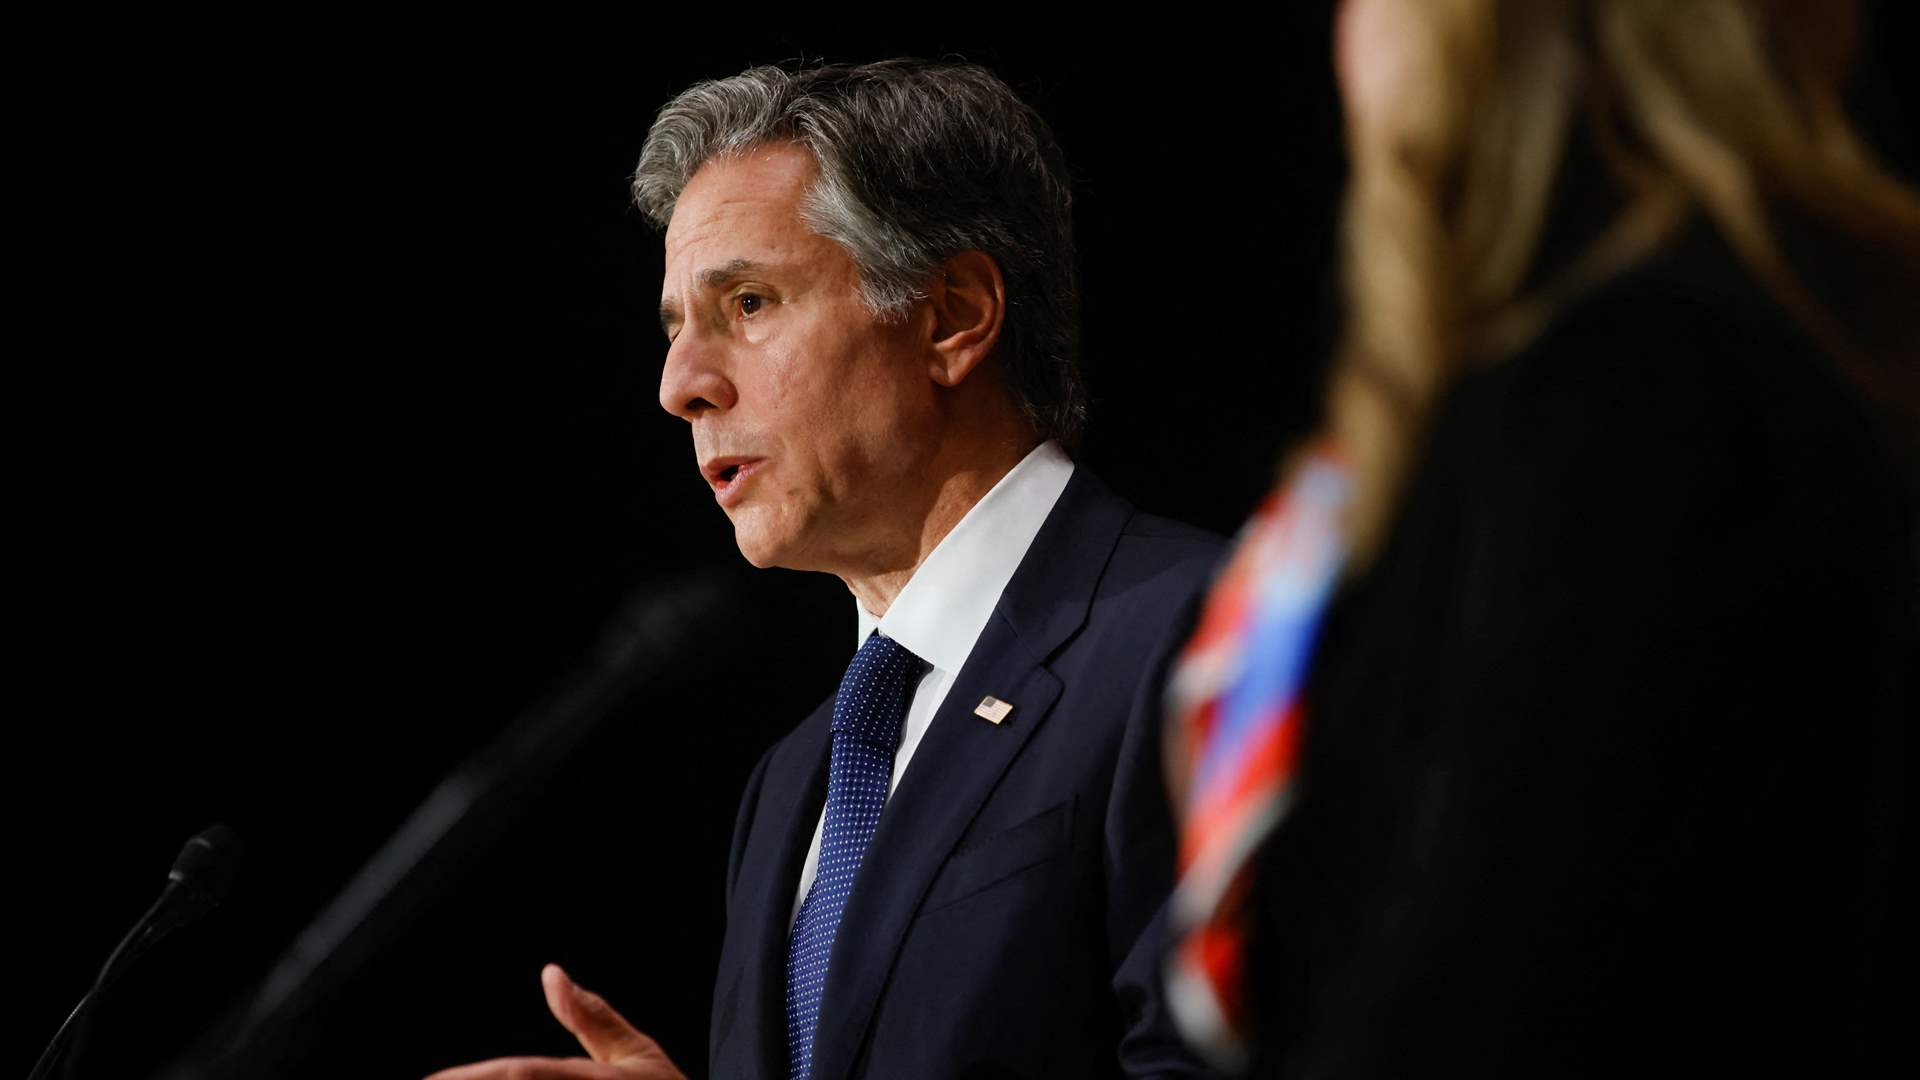 US Secretary of State Blinken stresses diplomacy for &#39;durable peace and security&#39; in G7 meeting